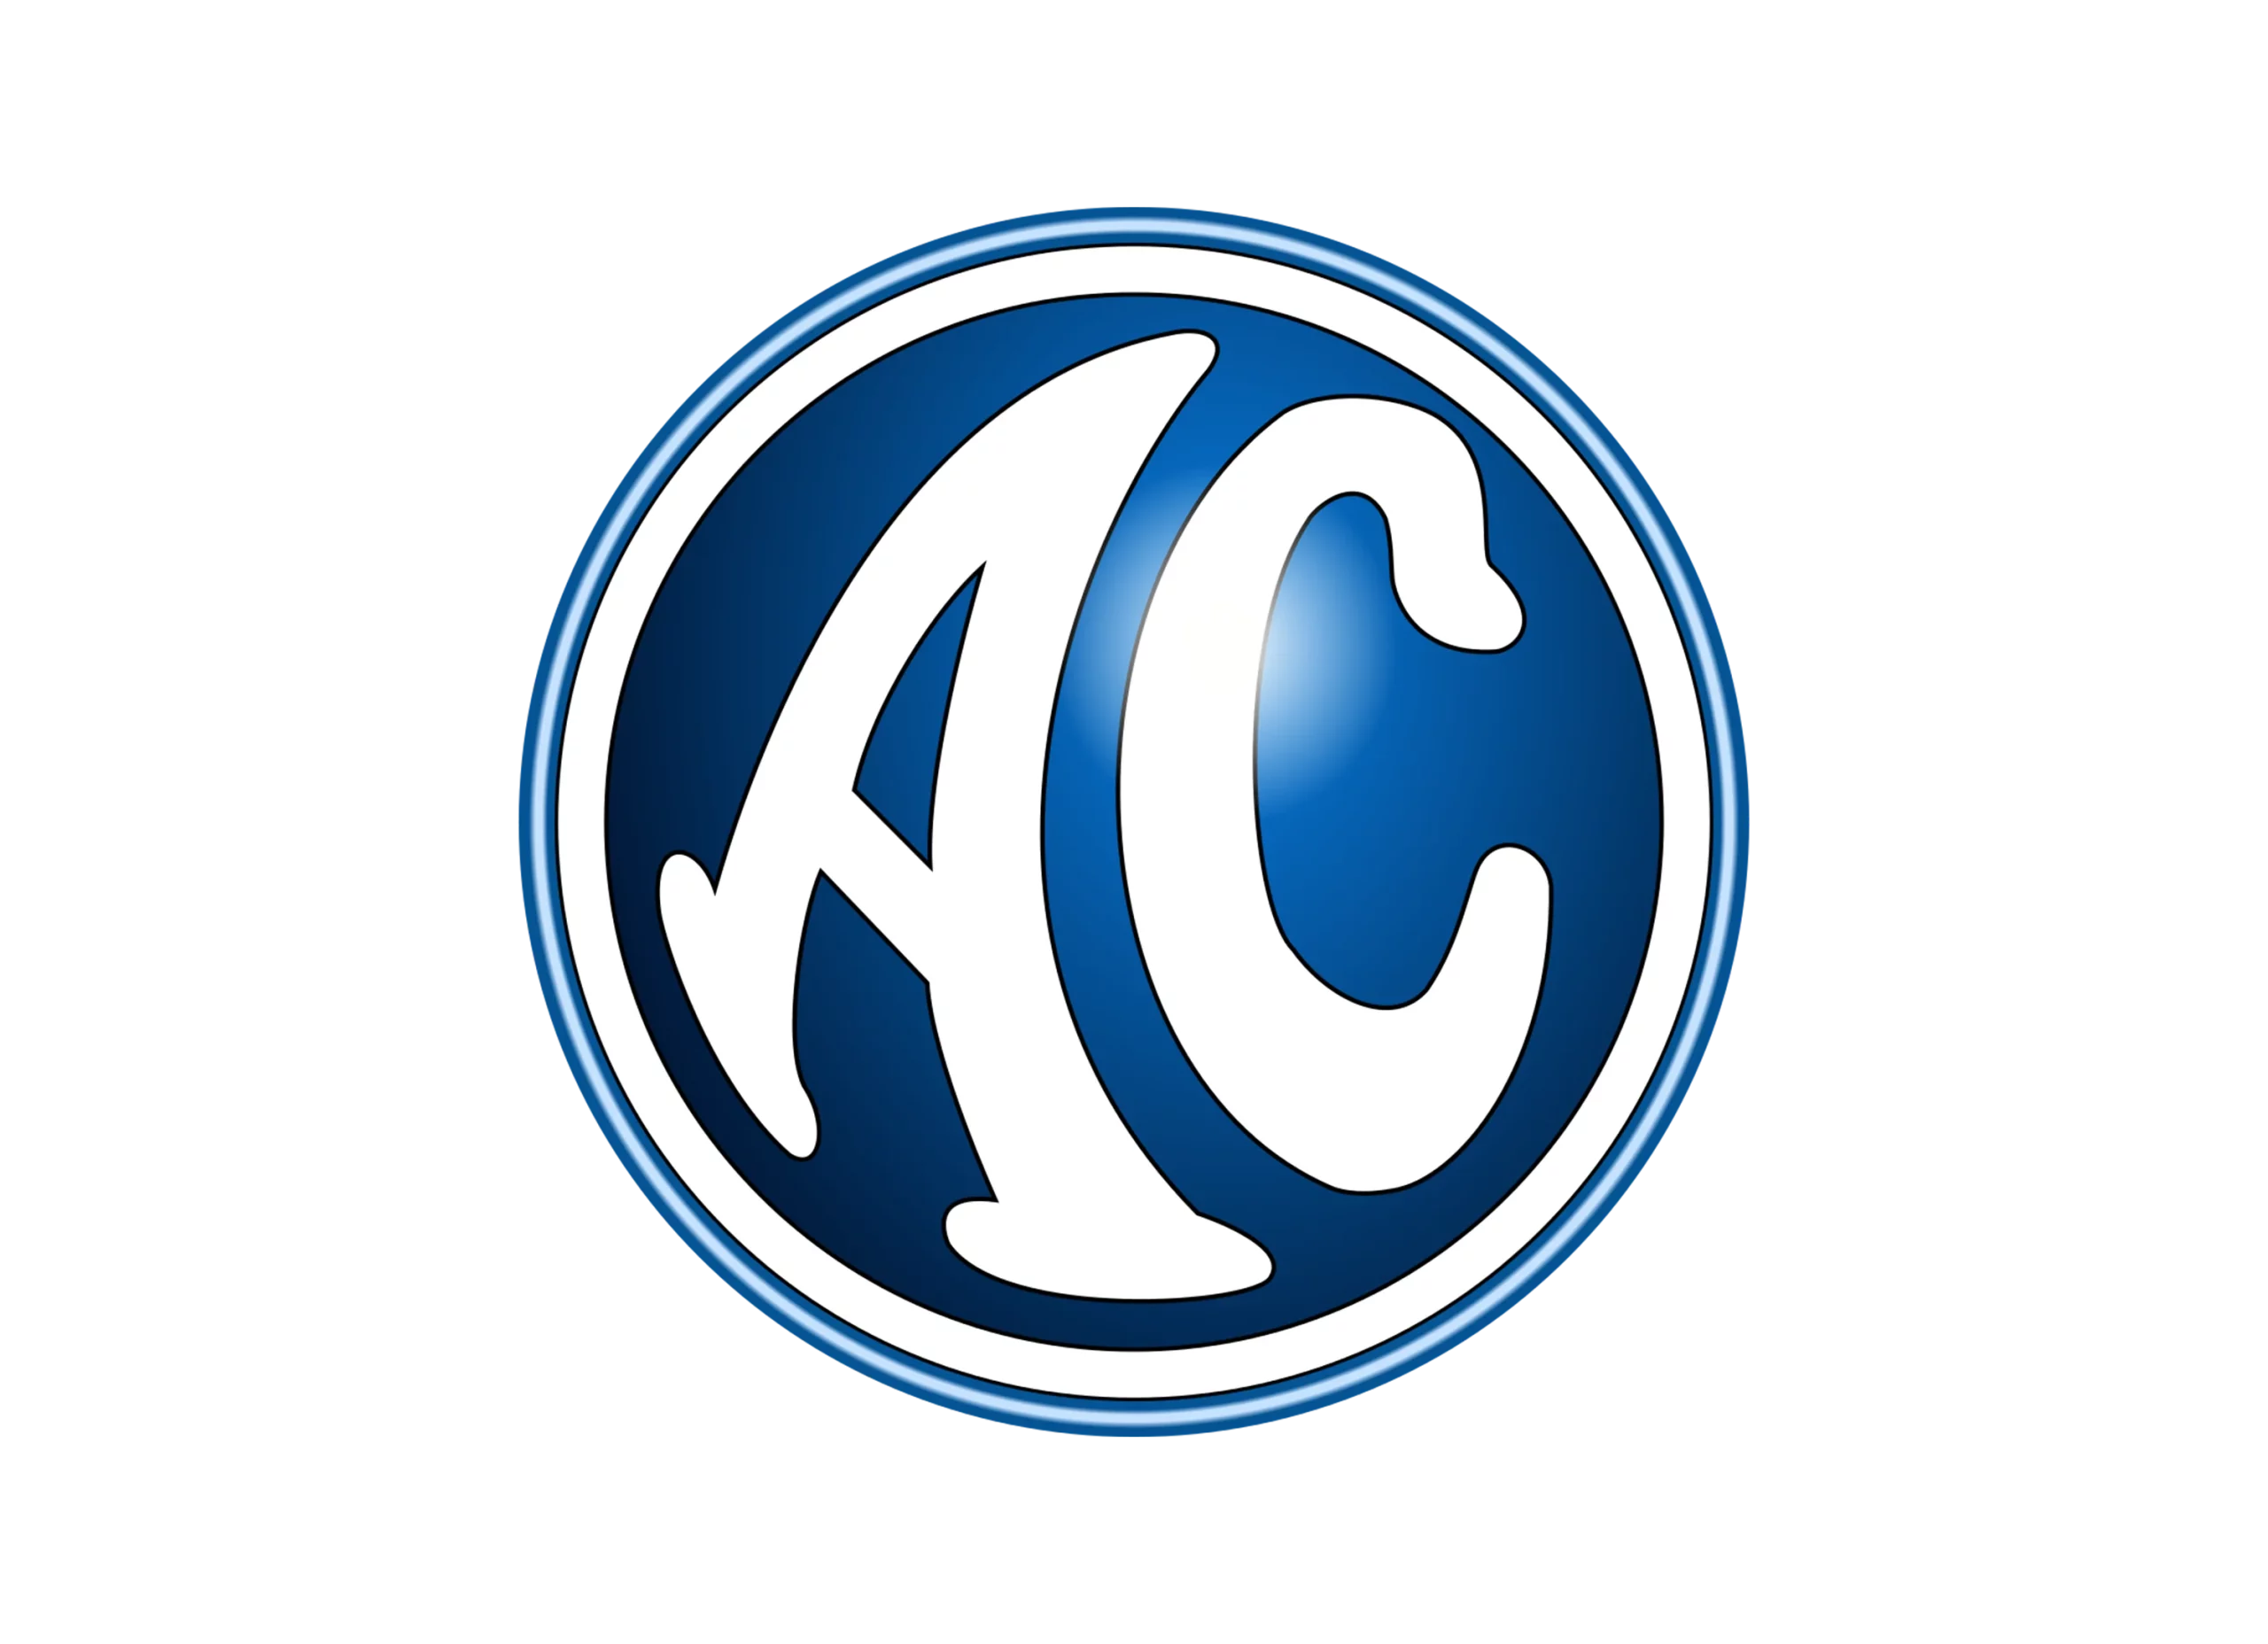 AC - Auto Carriers logo 1996-present